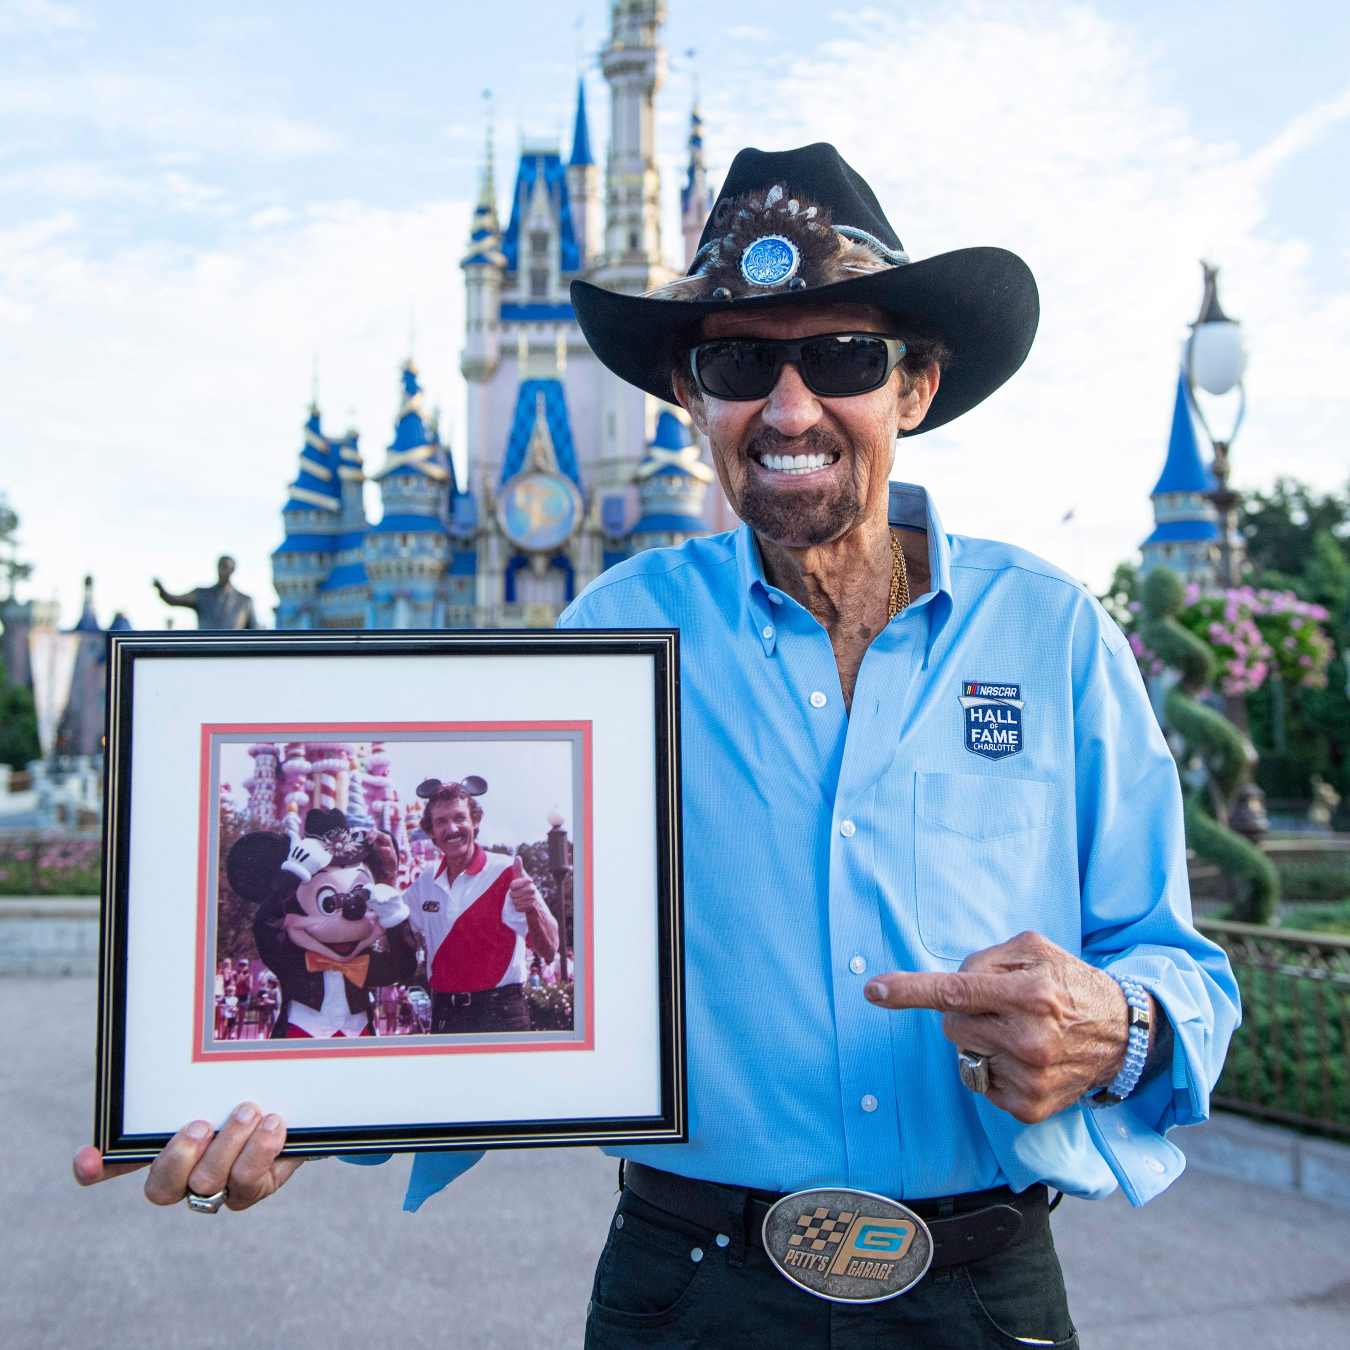 NASCAR Legend Richard Petty Shares Iconic Moment With Mickey Mouse